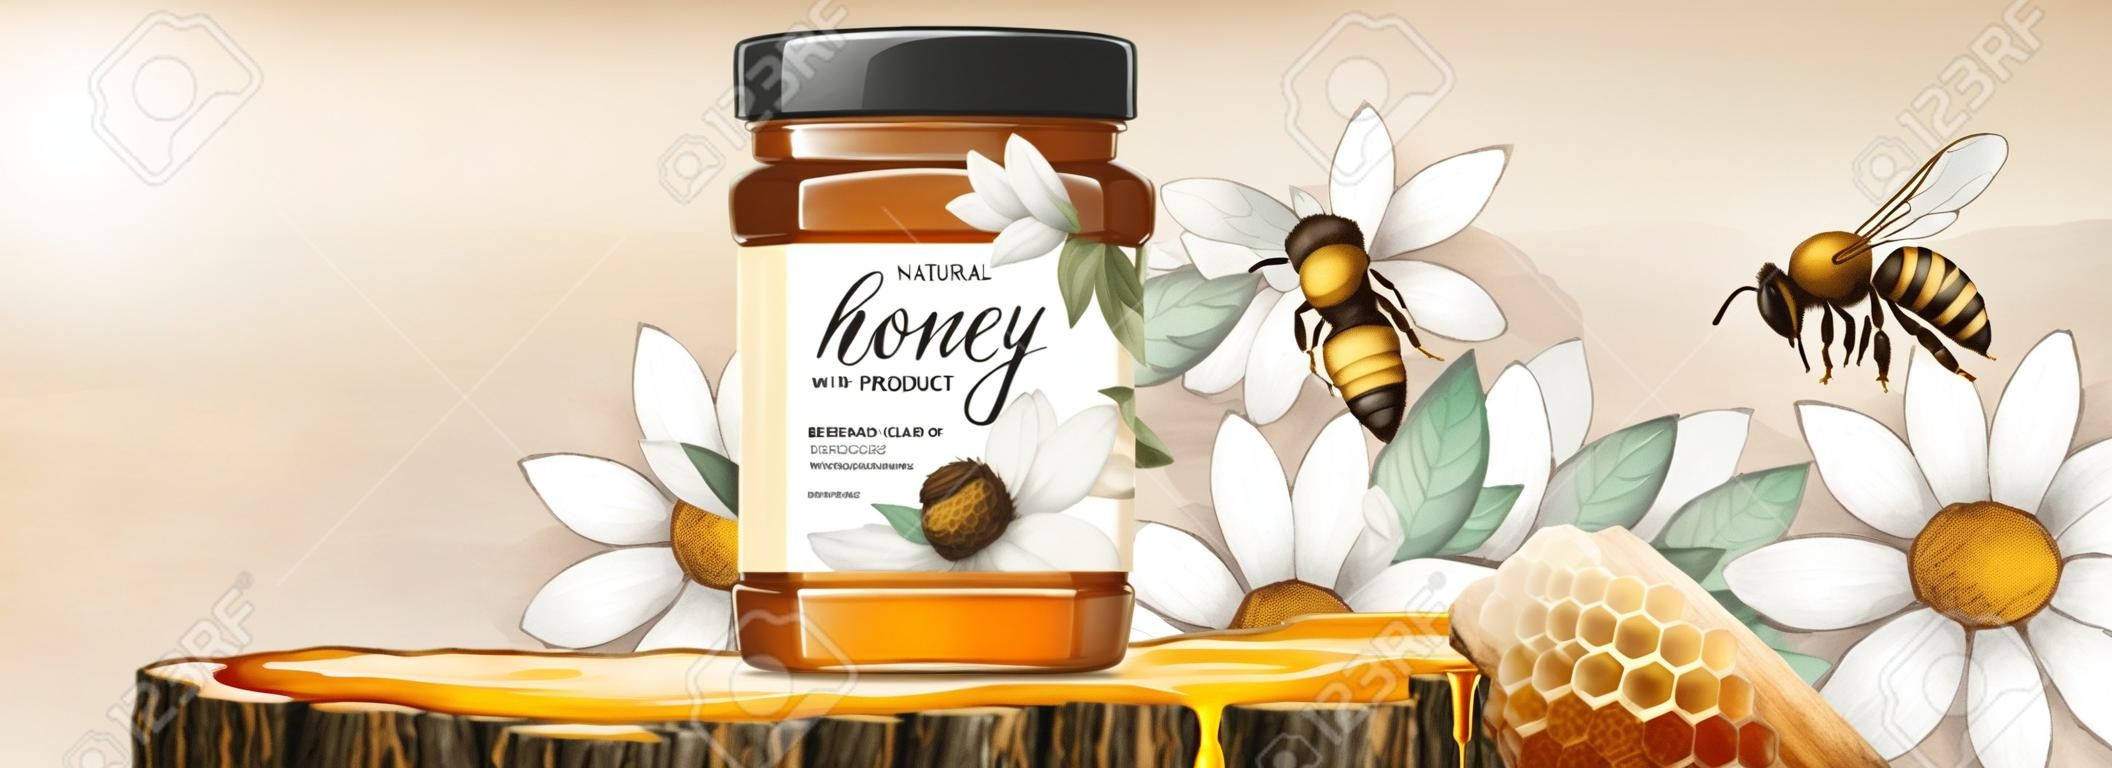 Natural honey product with beehive on tree trunk section platform in 3d illustration, white flower woodcut background